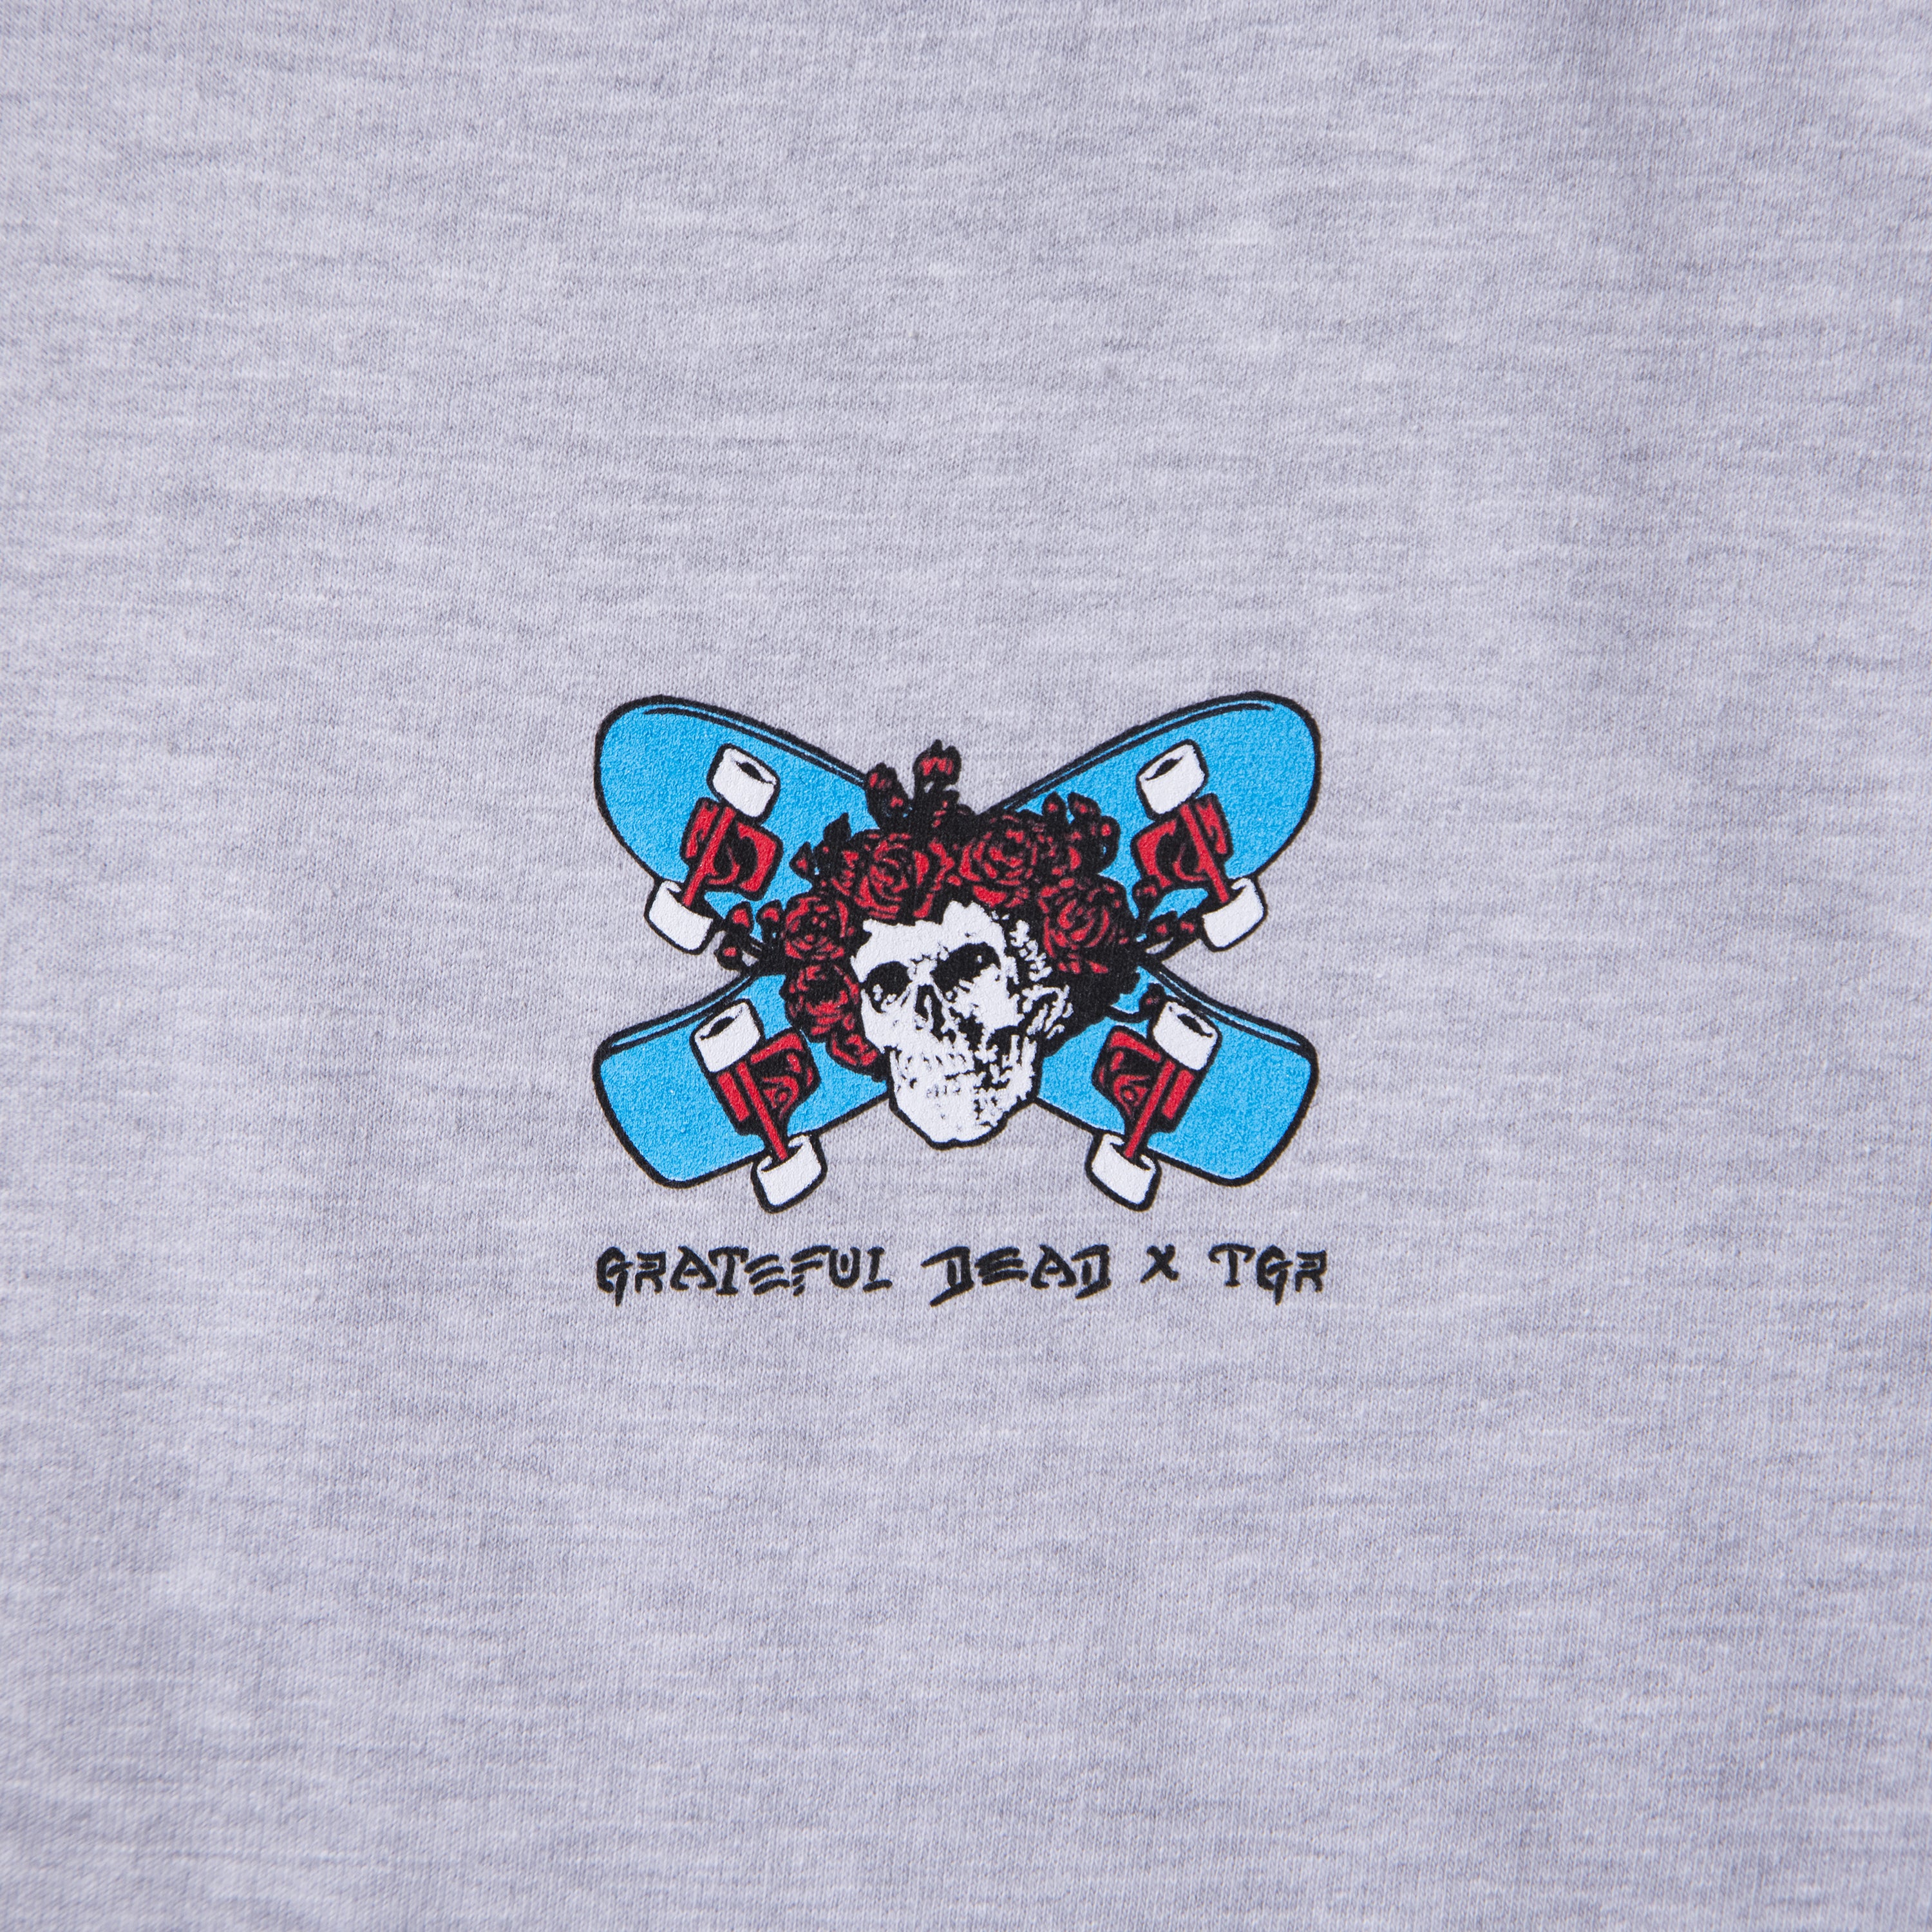 Grateful Dead x TGR “Gone Are the Days...We Just Ride” Hoodie by Brett Whitley